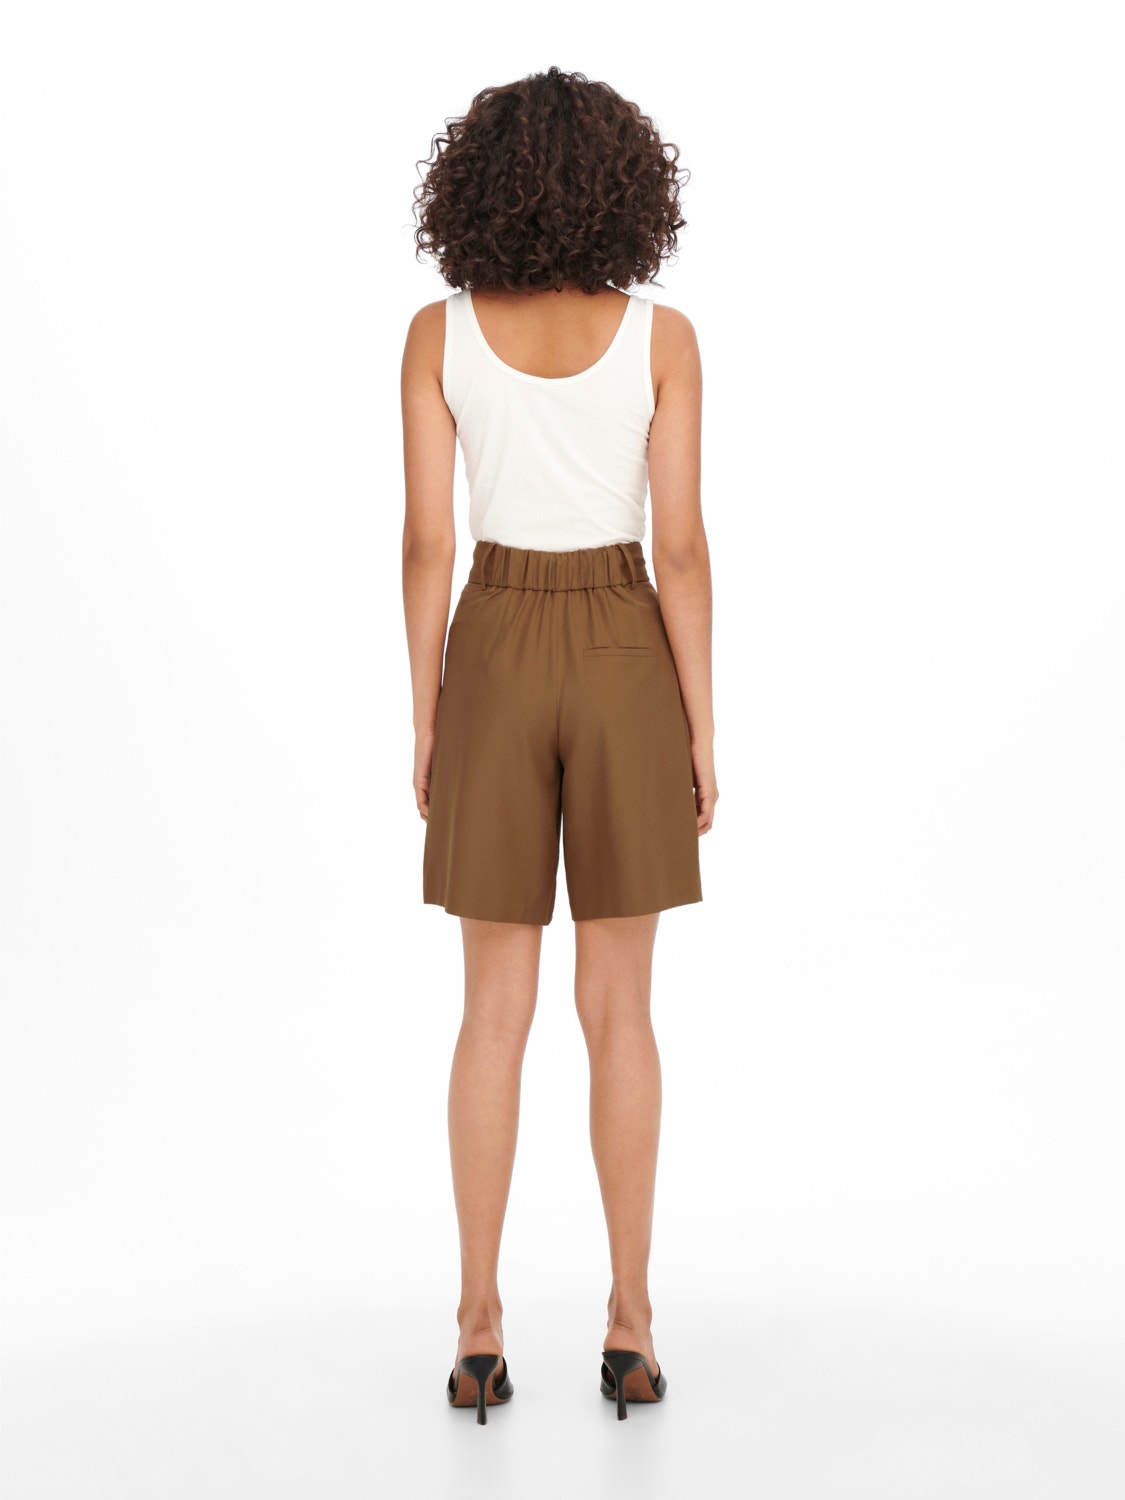 ONLY Shorts Regular Fit -Toffee - 15259594